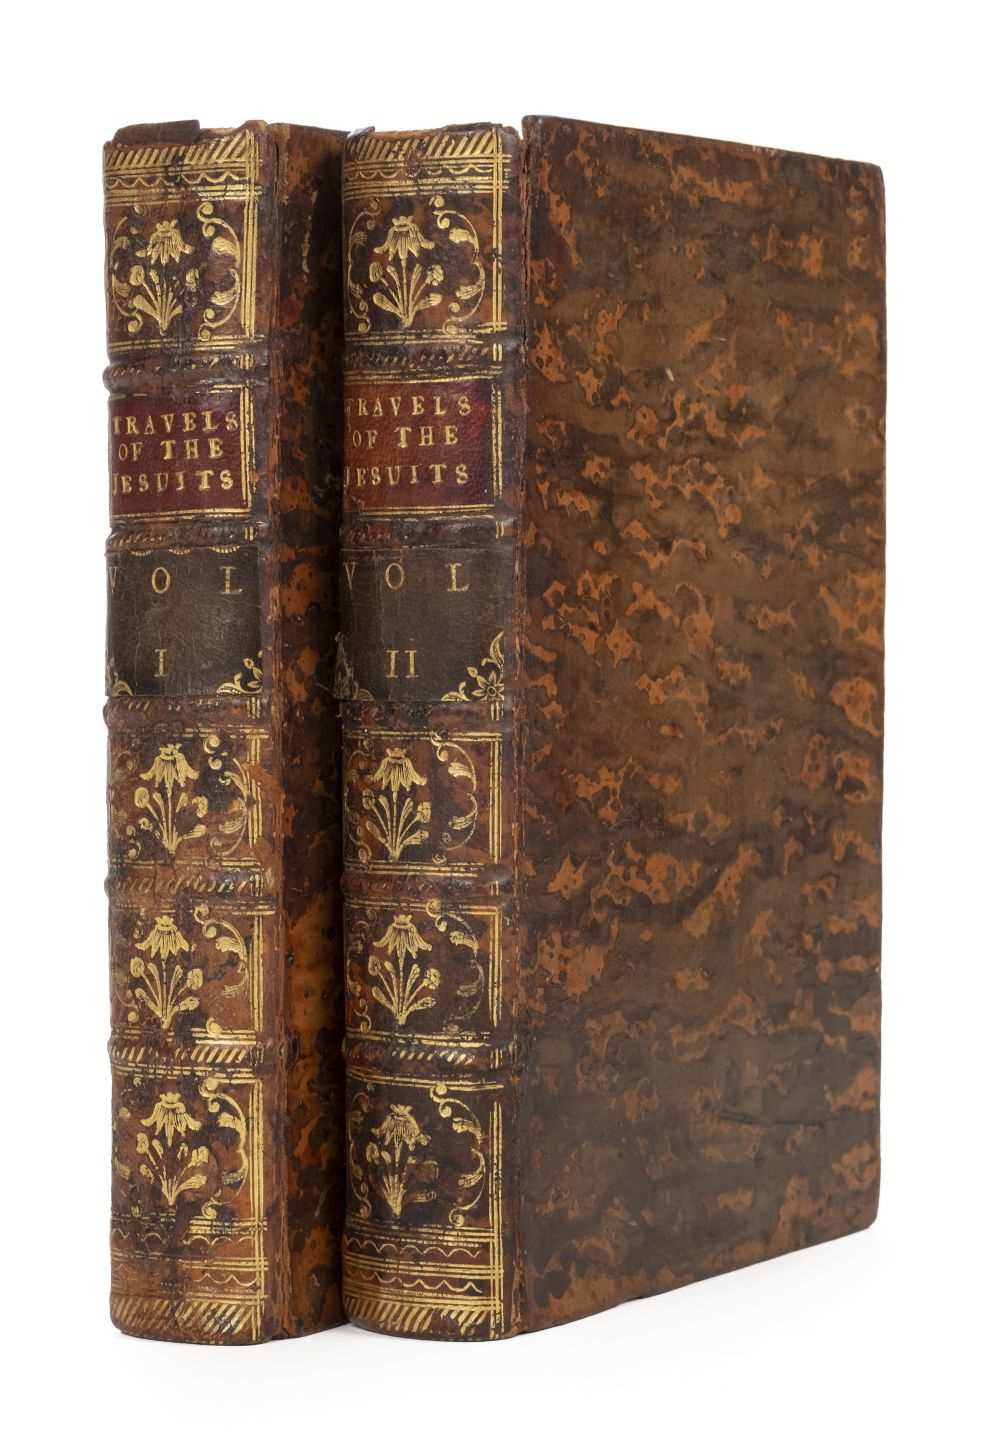 Lot 22 - Lockman (John). Travels of the Jesuits, into Various Parts of the World, 1st edition, 1743